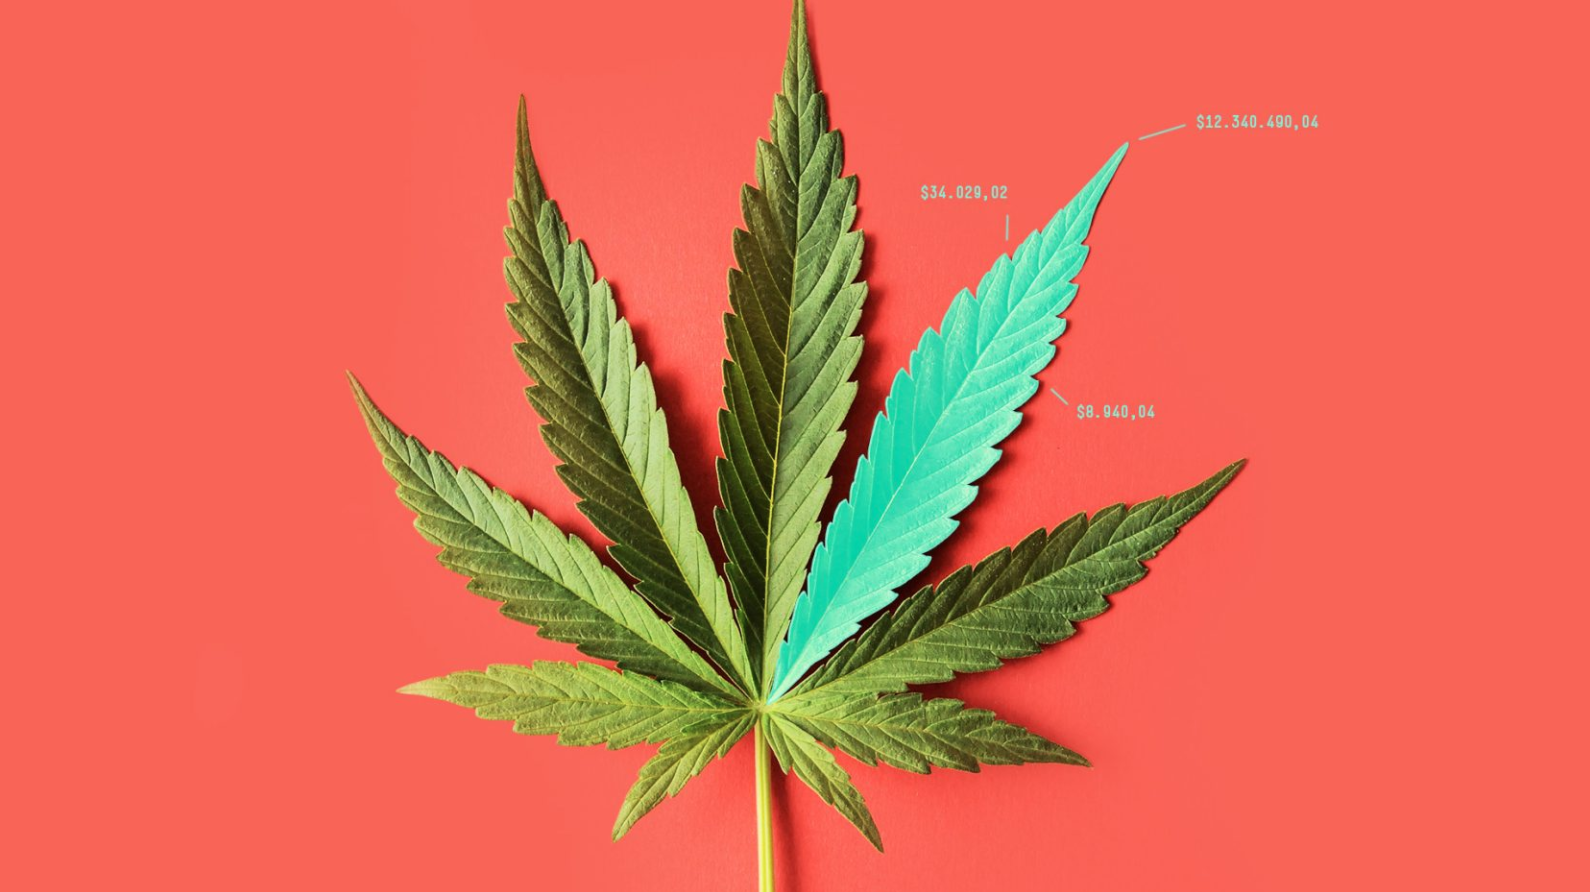 5 insights that big data has gleaned about cannabis